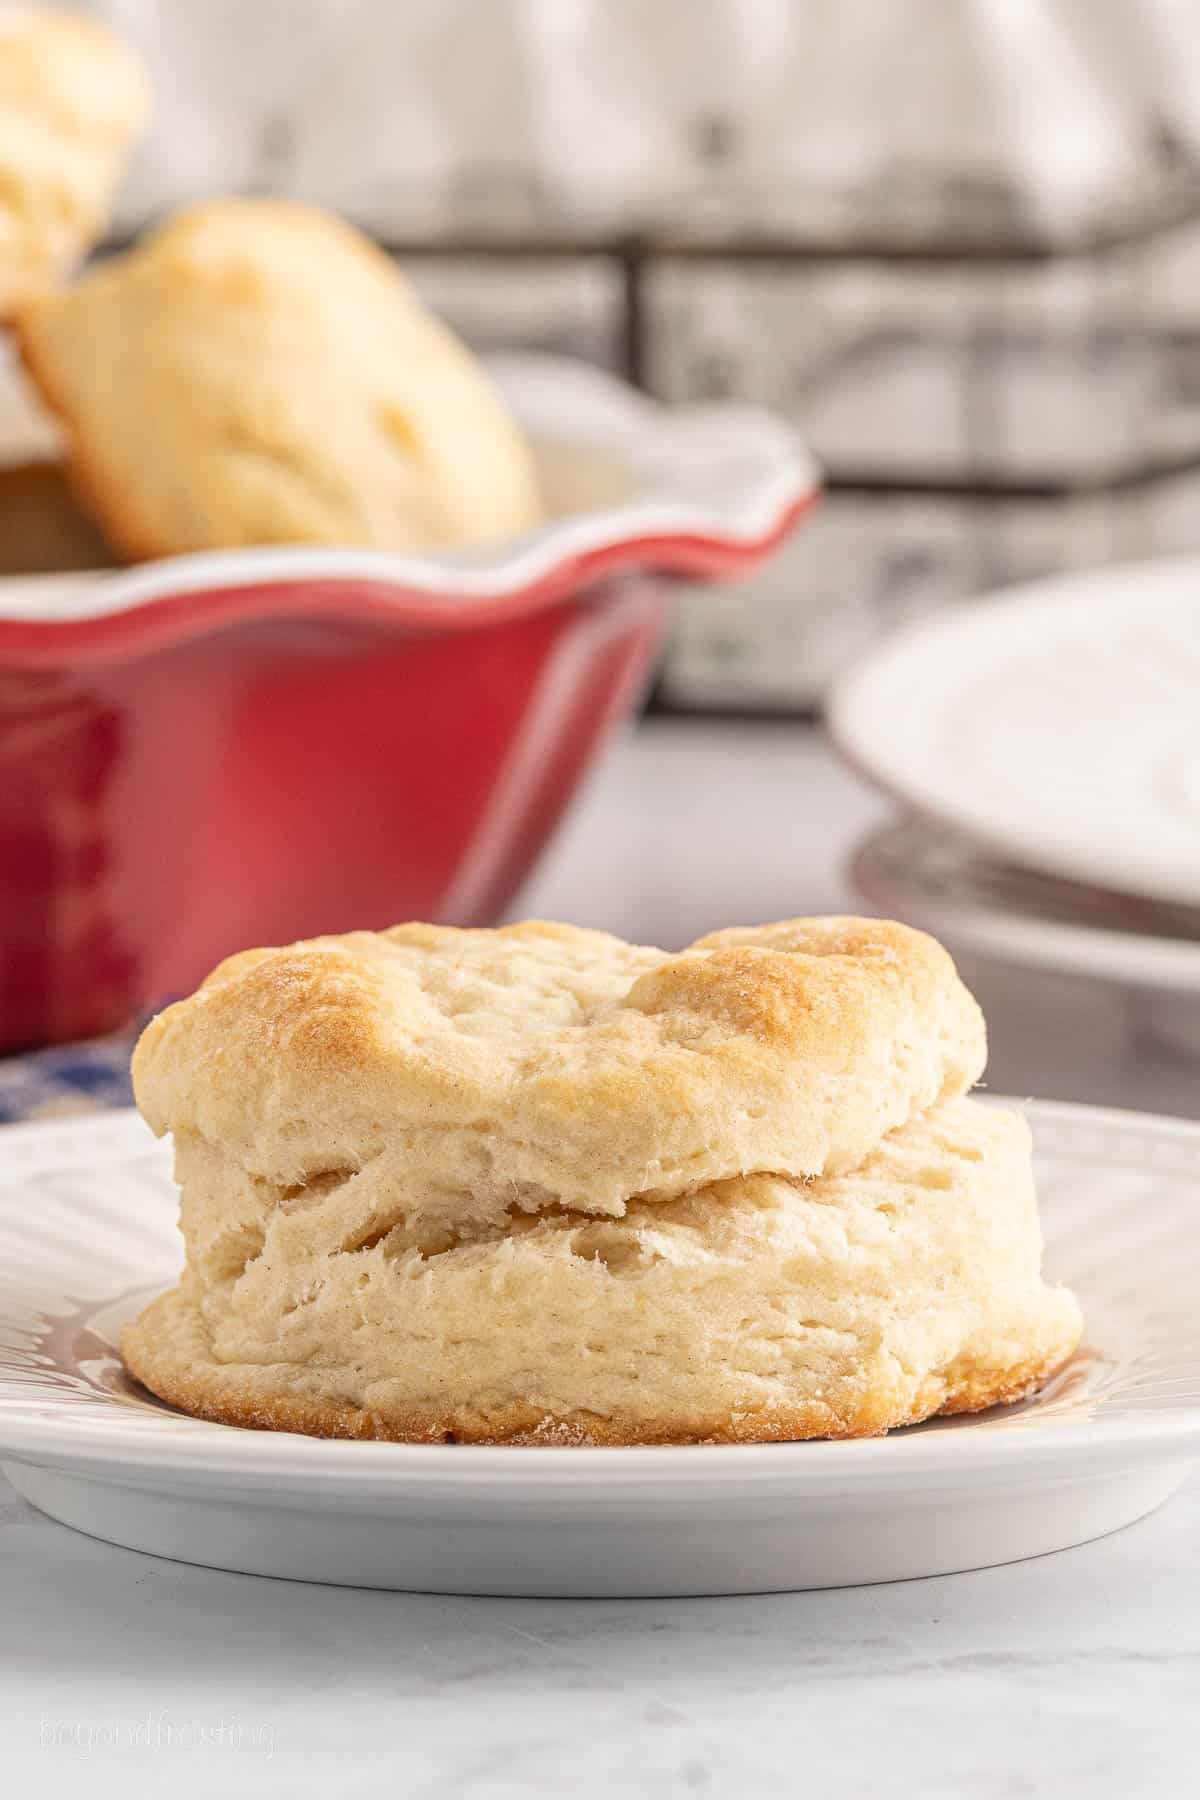 A homemade biscuit on a plate